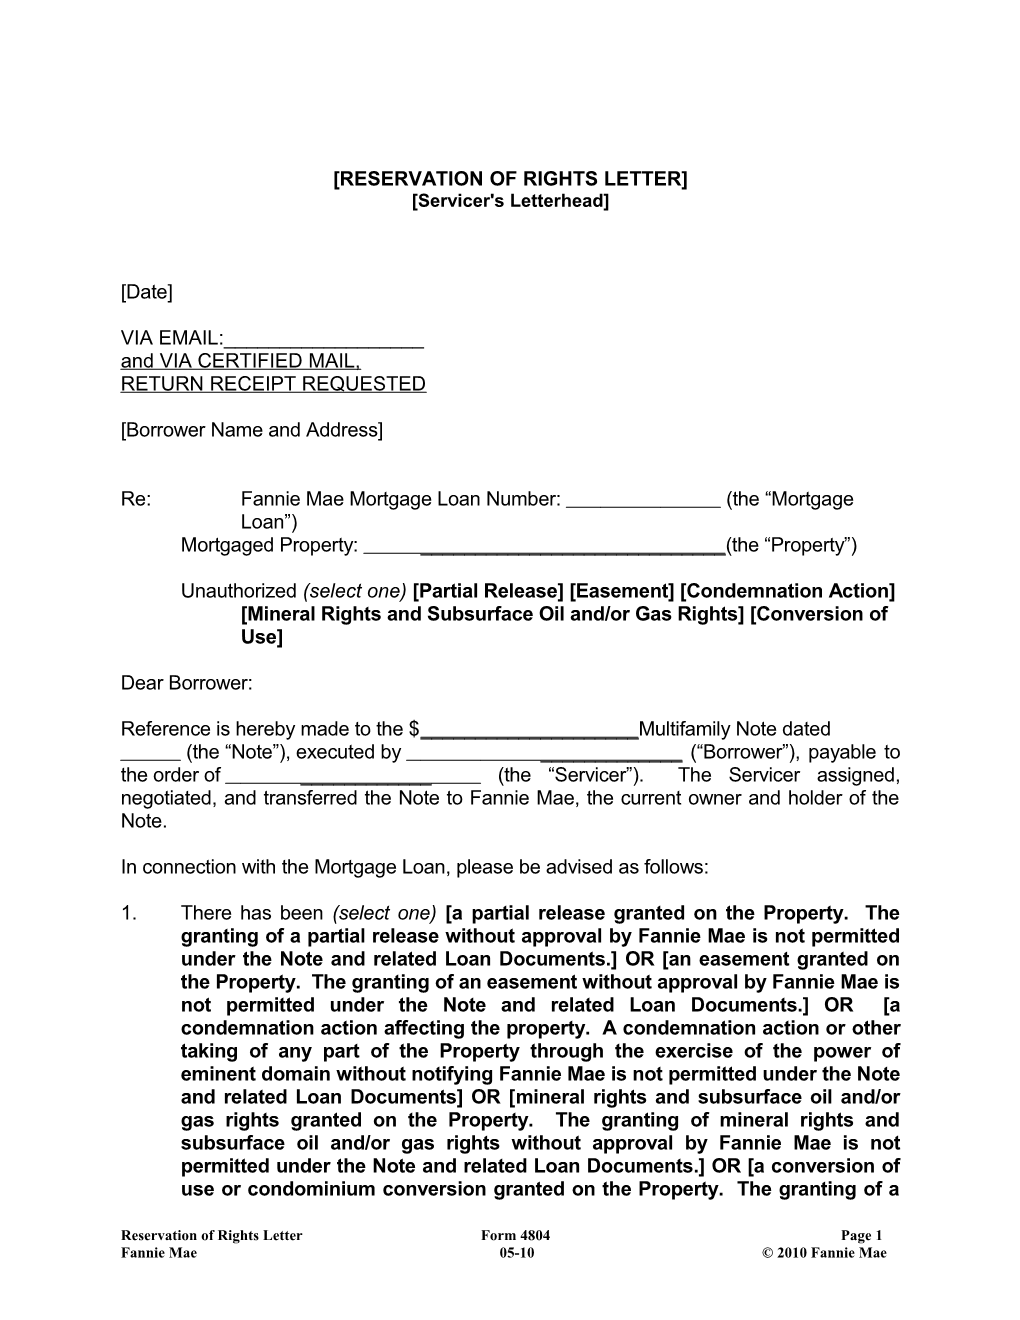 Multifamily Form 4804 Reservation of Rights Letter